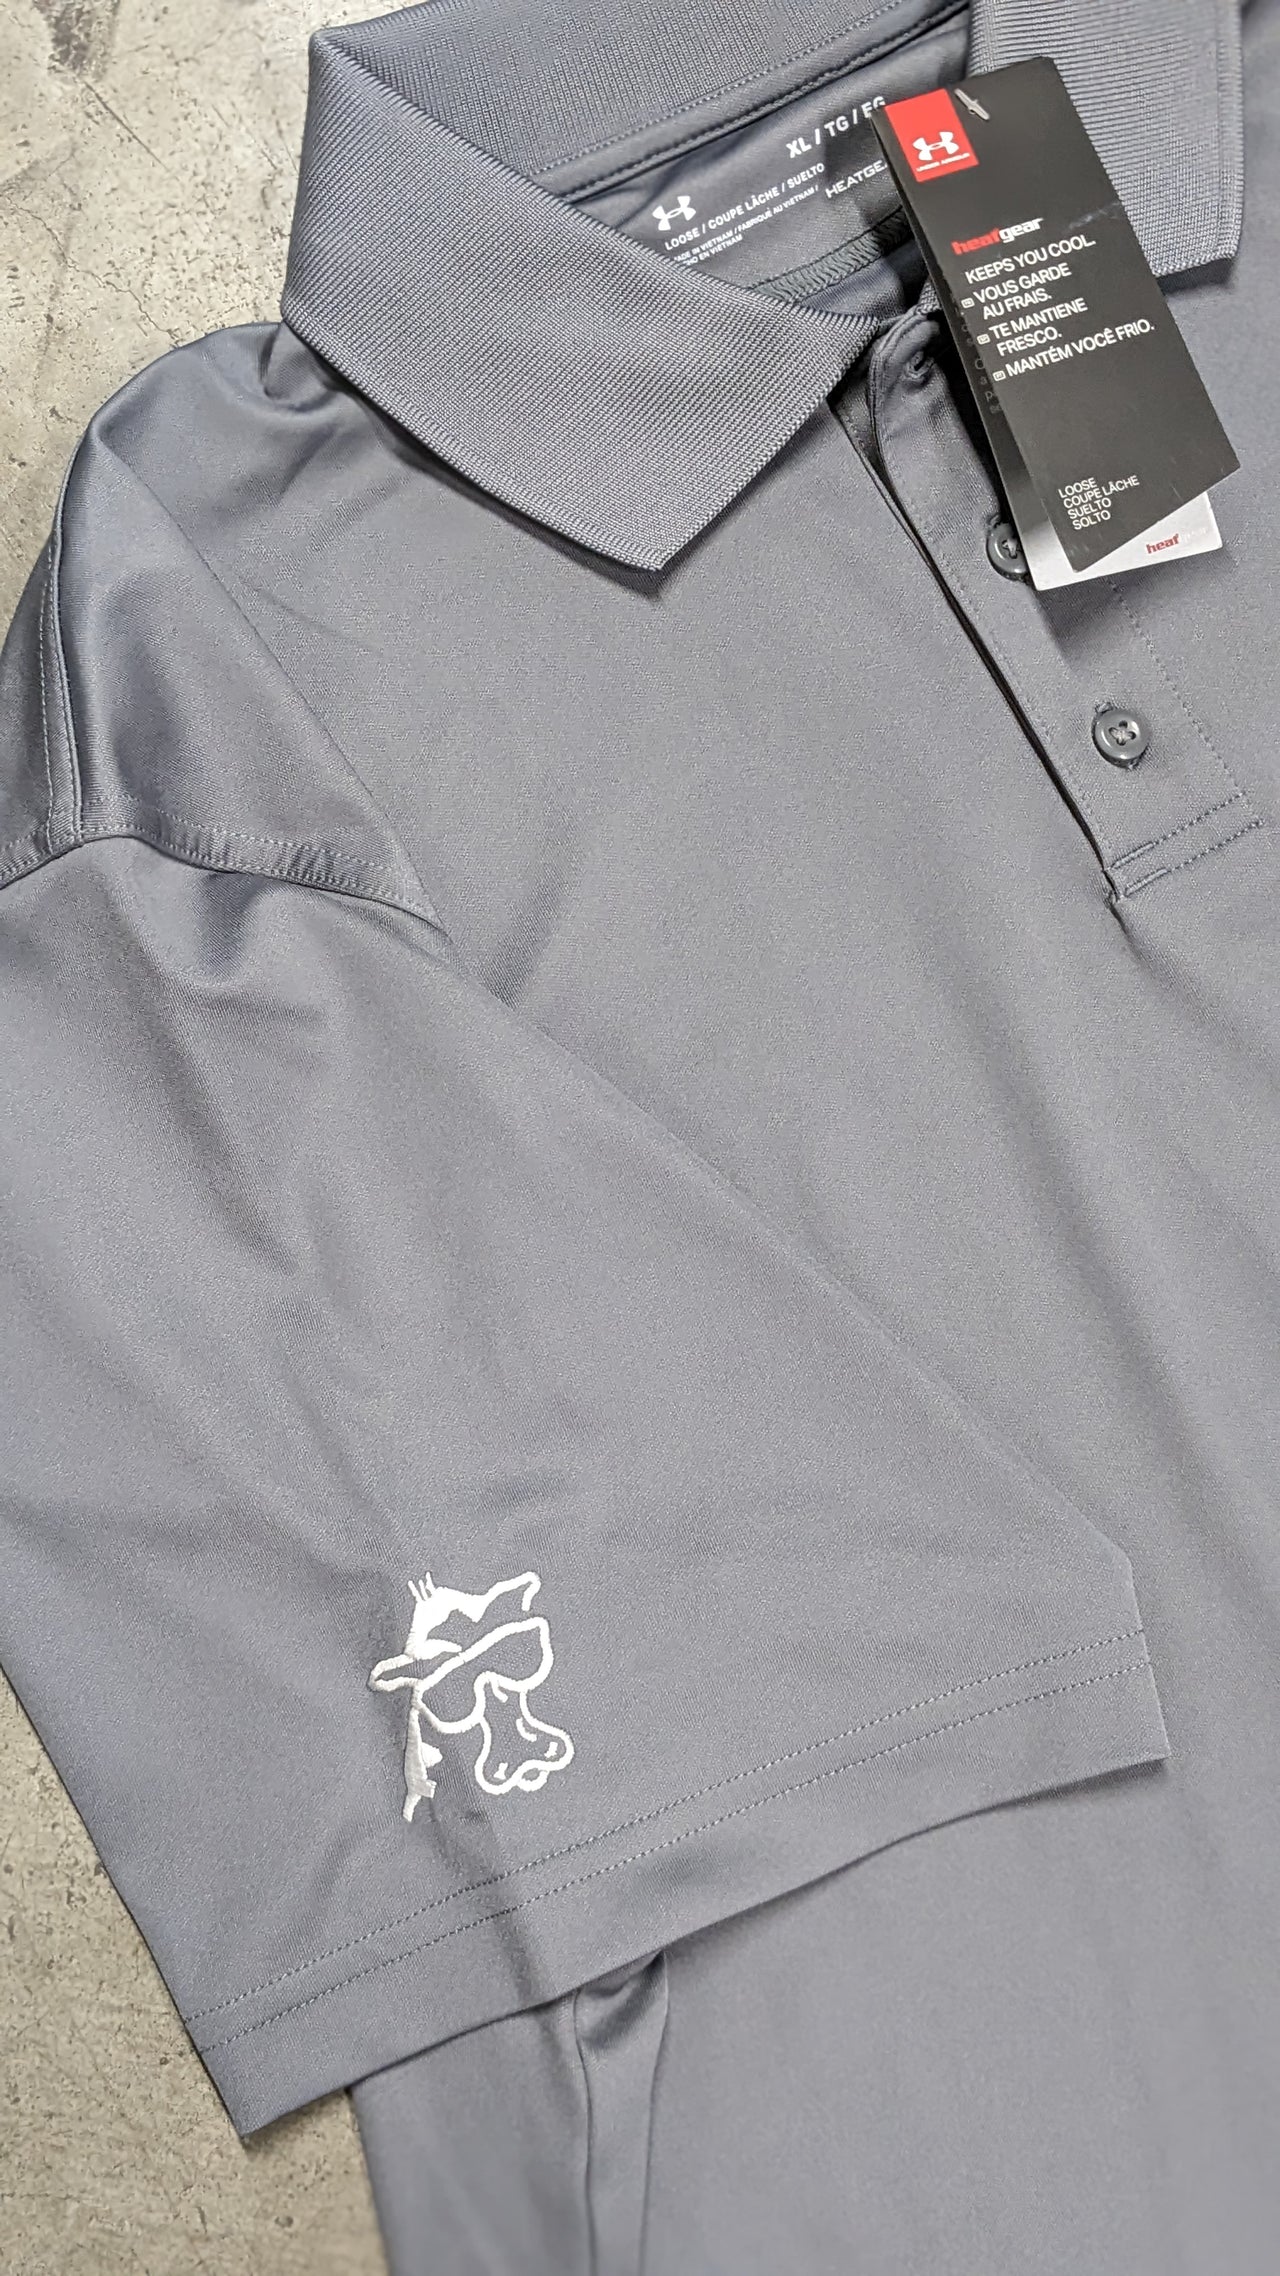 Under Armour Team Performance Polo with Larry the Cow Embroidered on Sleeve